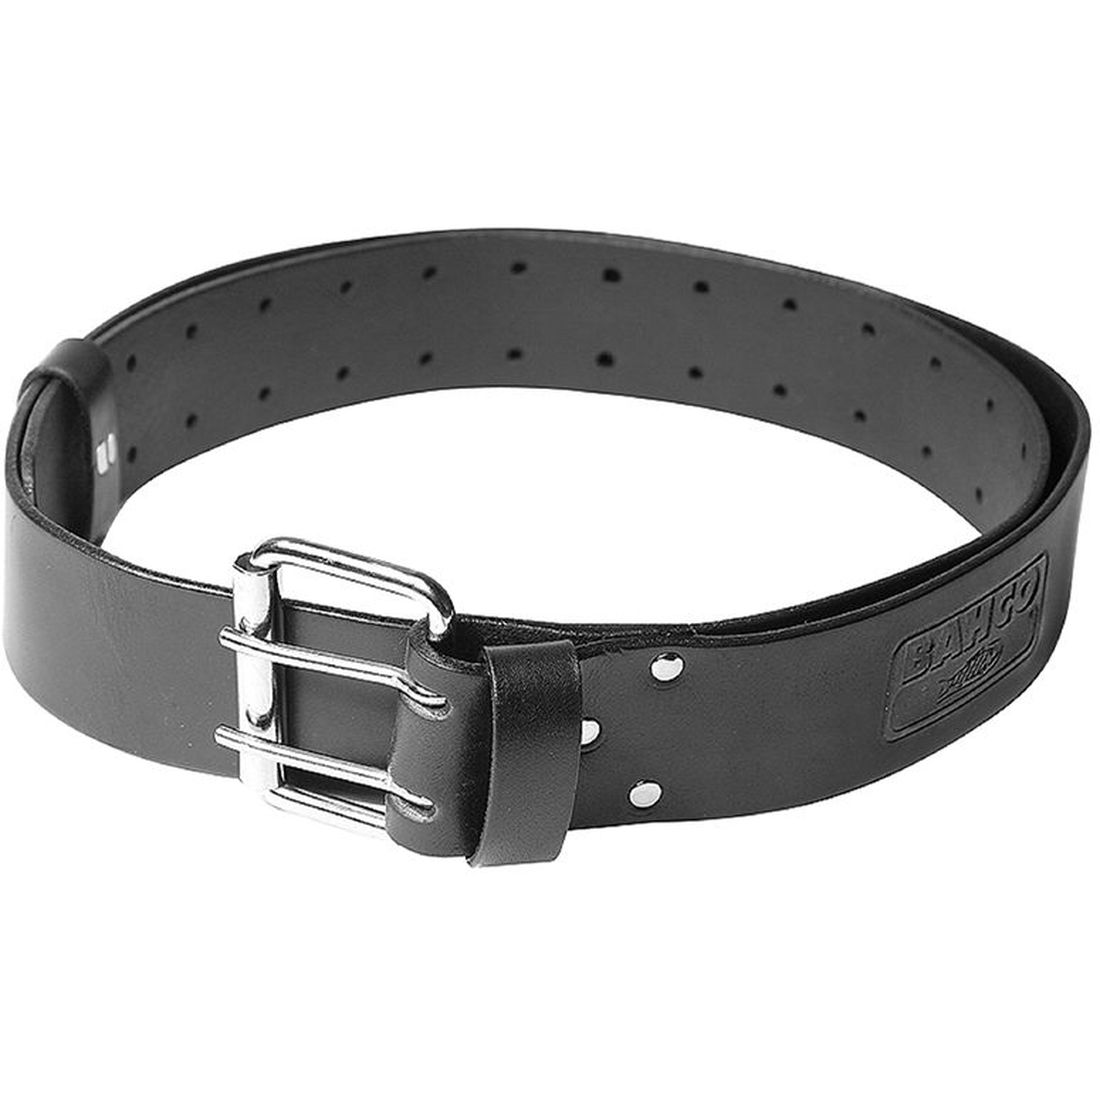 Bahco 4750-HDLB-1 Heavy-Duty Leather Belt                                             